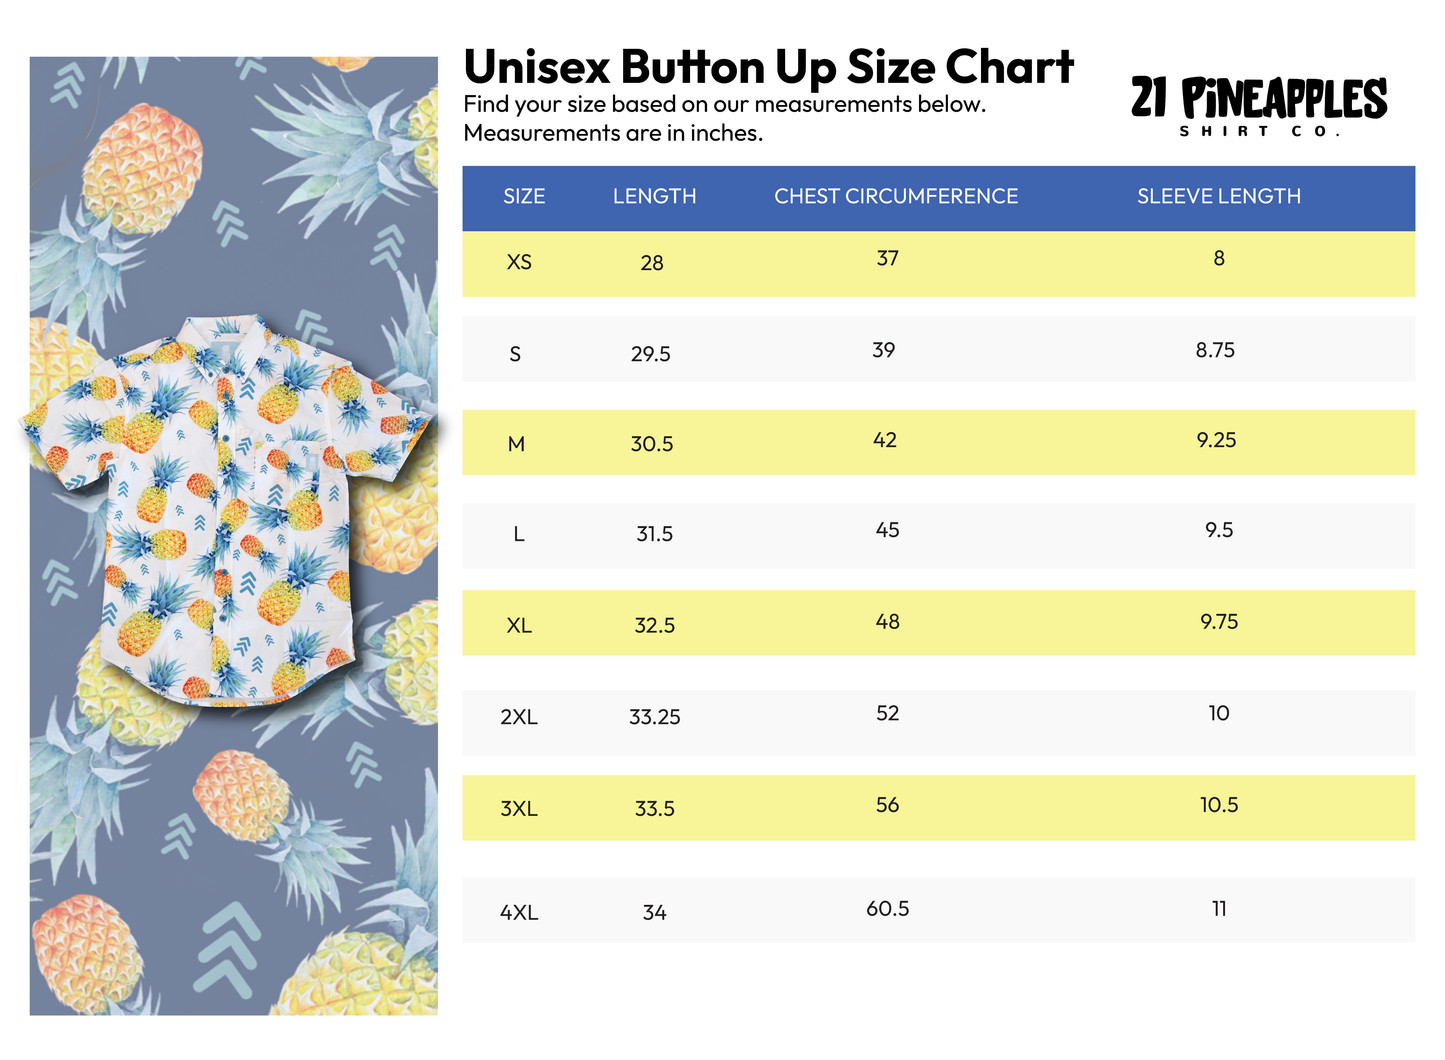 21 Pineapples "Drink Up" Button Up